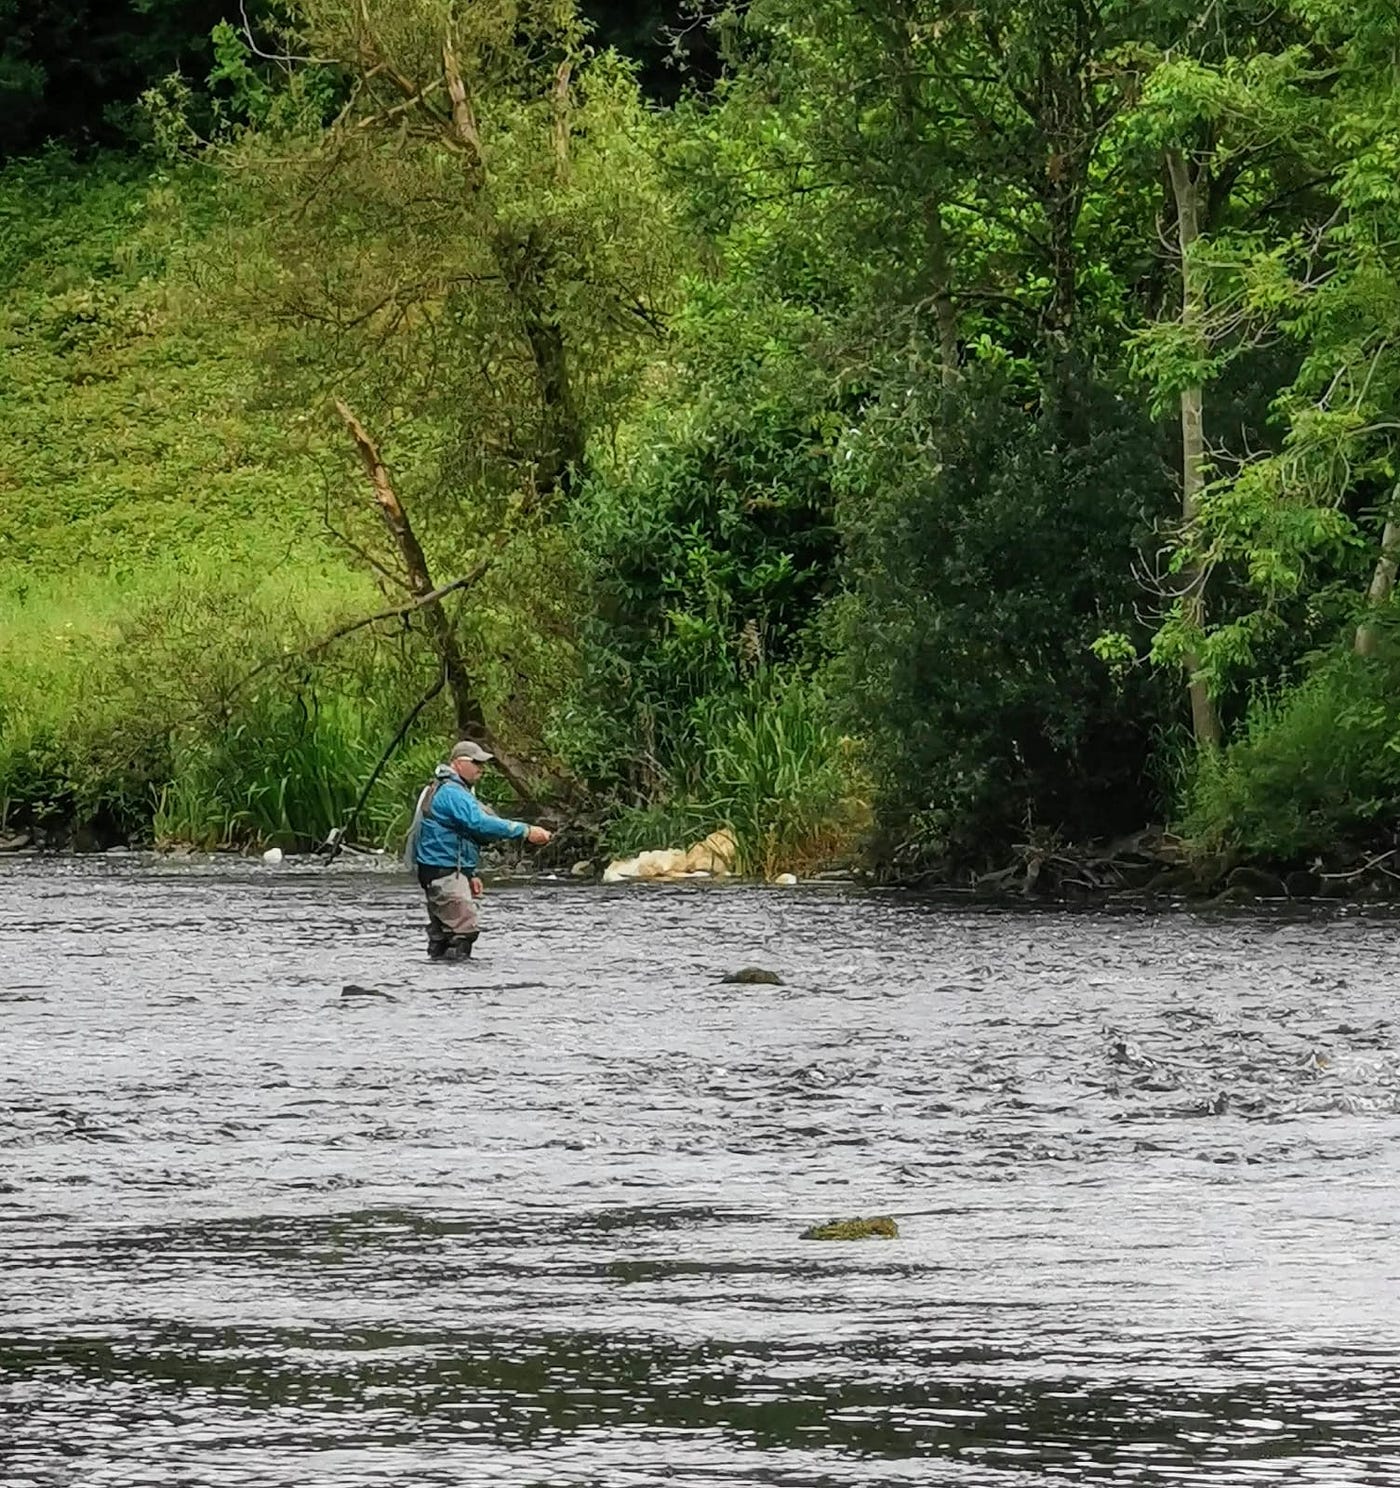 Peter Driver on Trout River Tactics for September plus Winning the National  River Championship, by Editor Ireland on the Fly, Ireland on the Fly